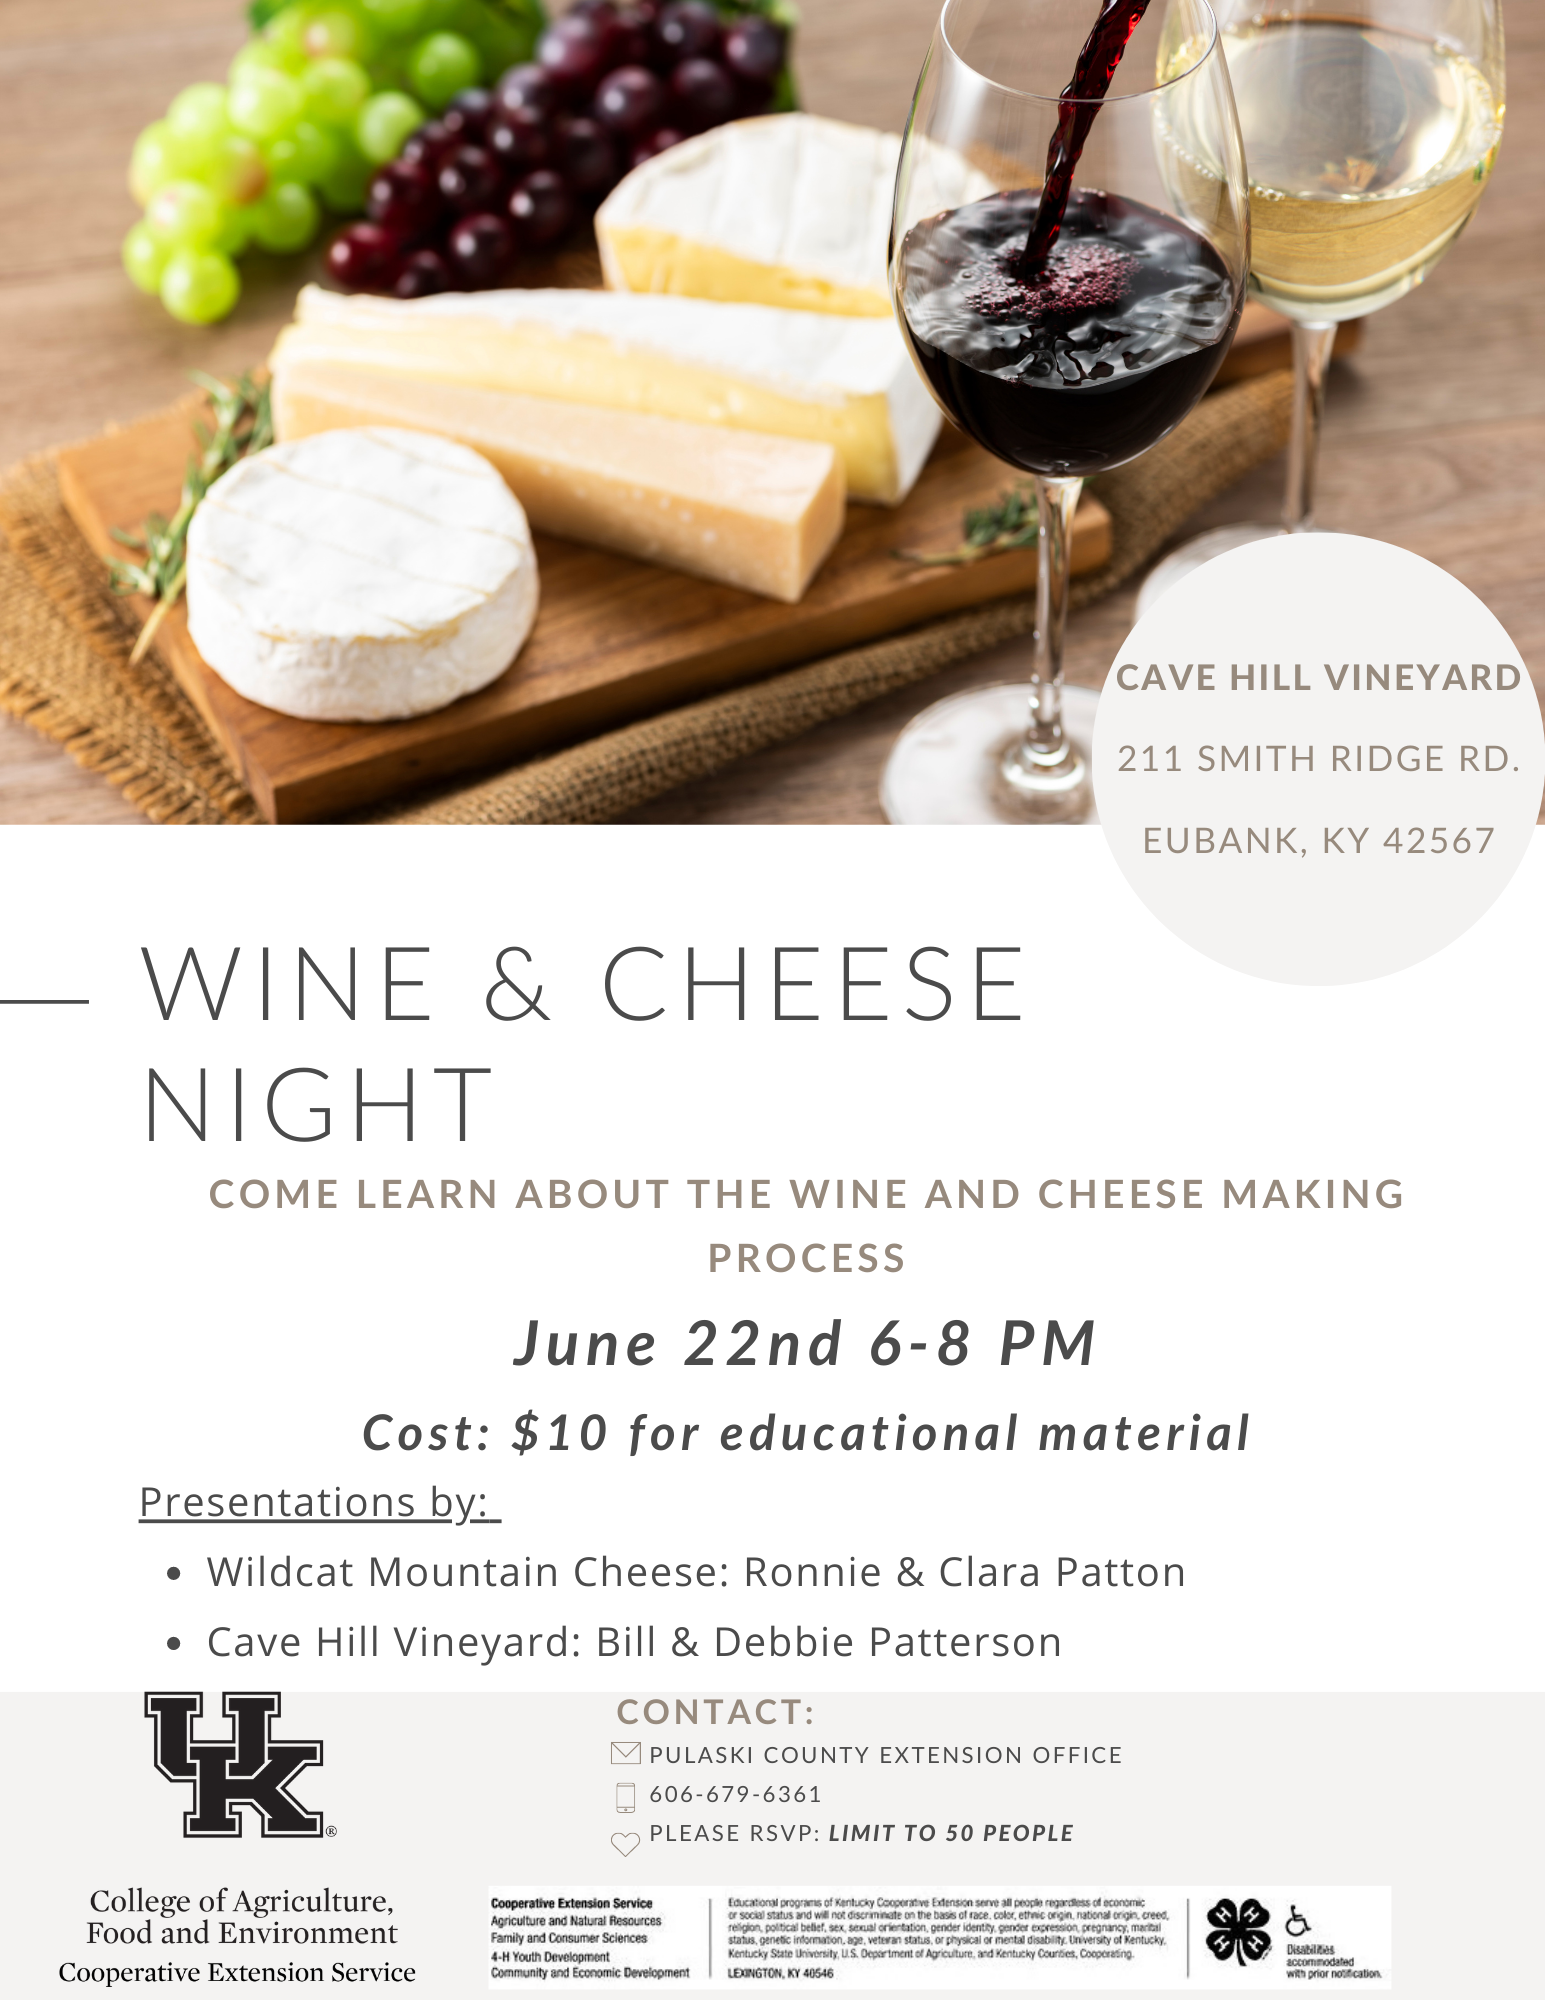 flyer about wine and cheese night June 22nd 6-8 pm call 606-679-6361 for more information 